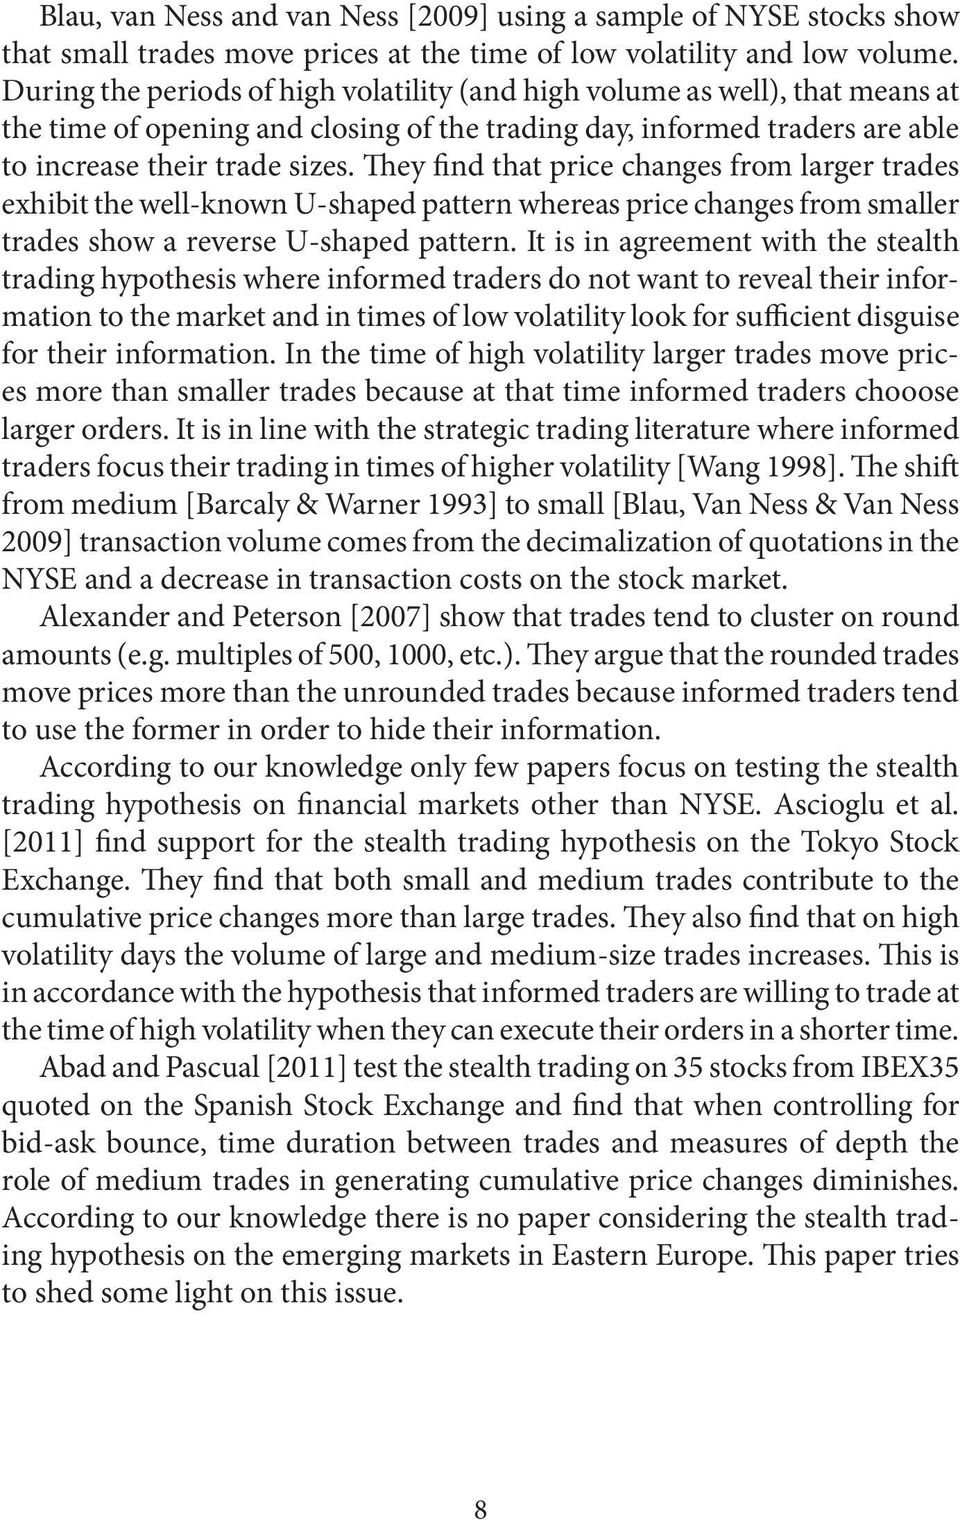 They find that price changes from larger trades exhibit the well-known U-shaped pattern whereas price changes from smaller trades show a reverse U-shaped pattern.